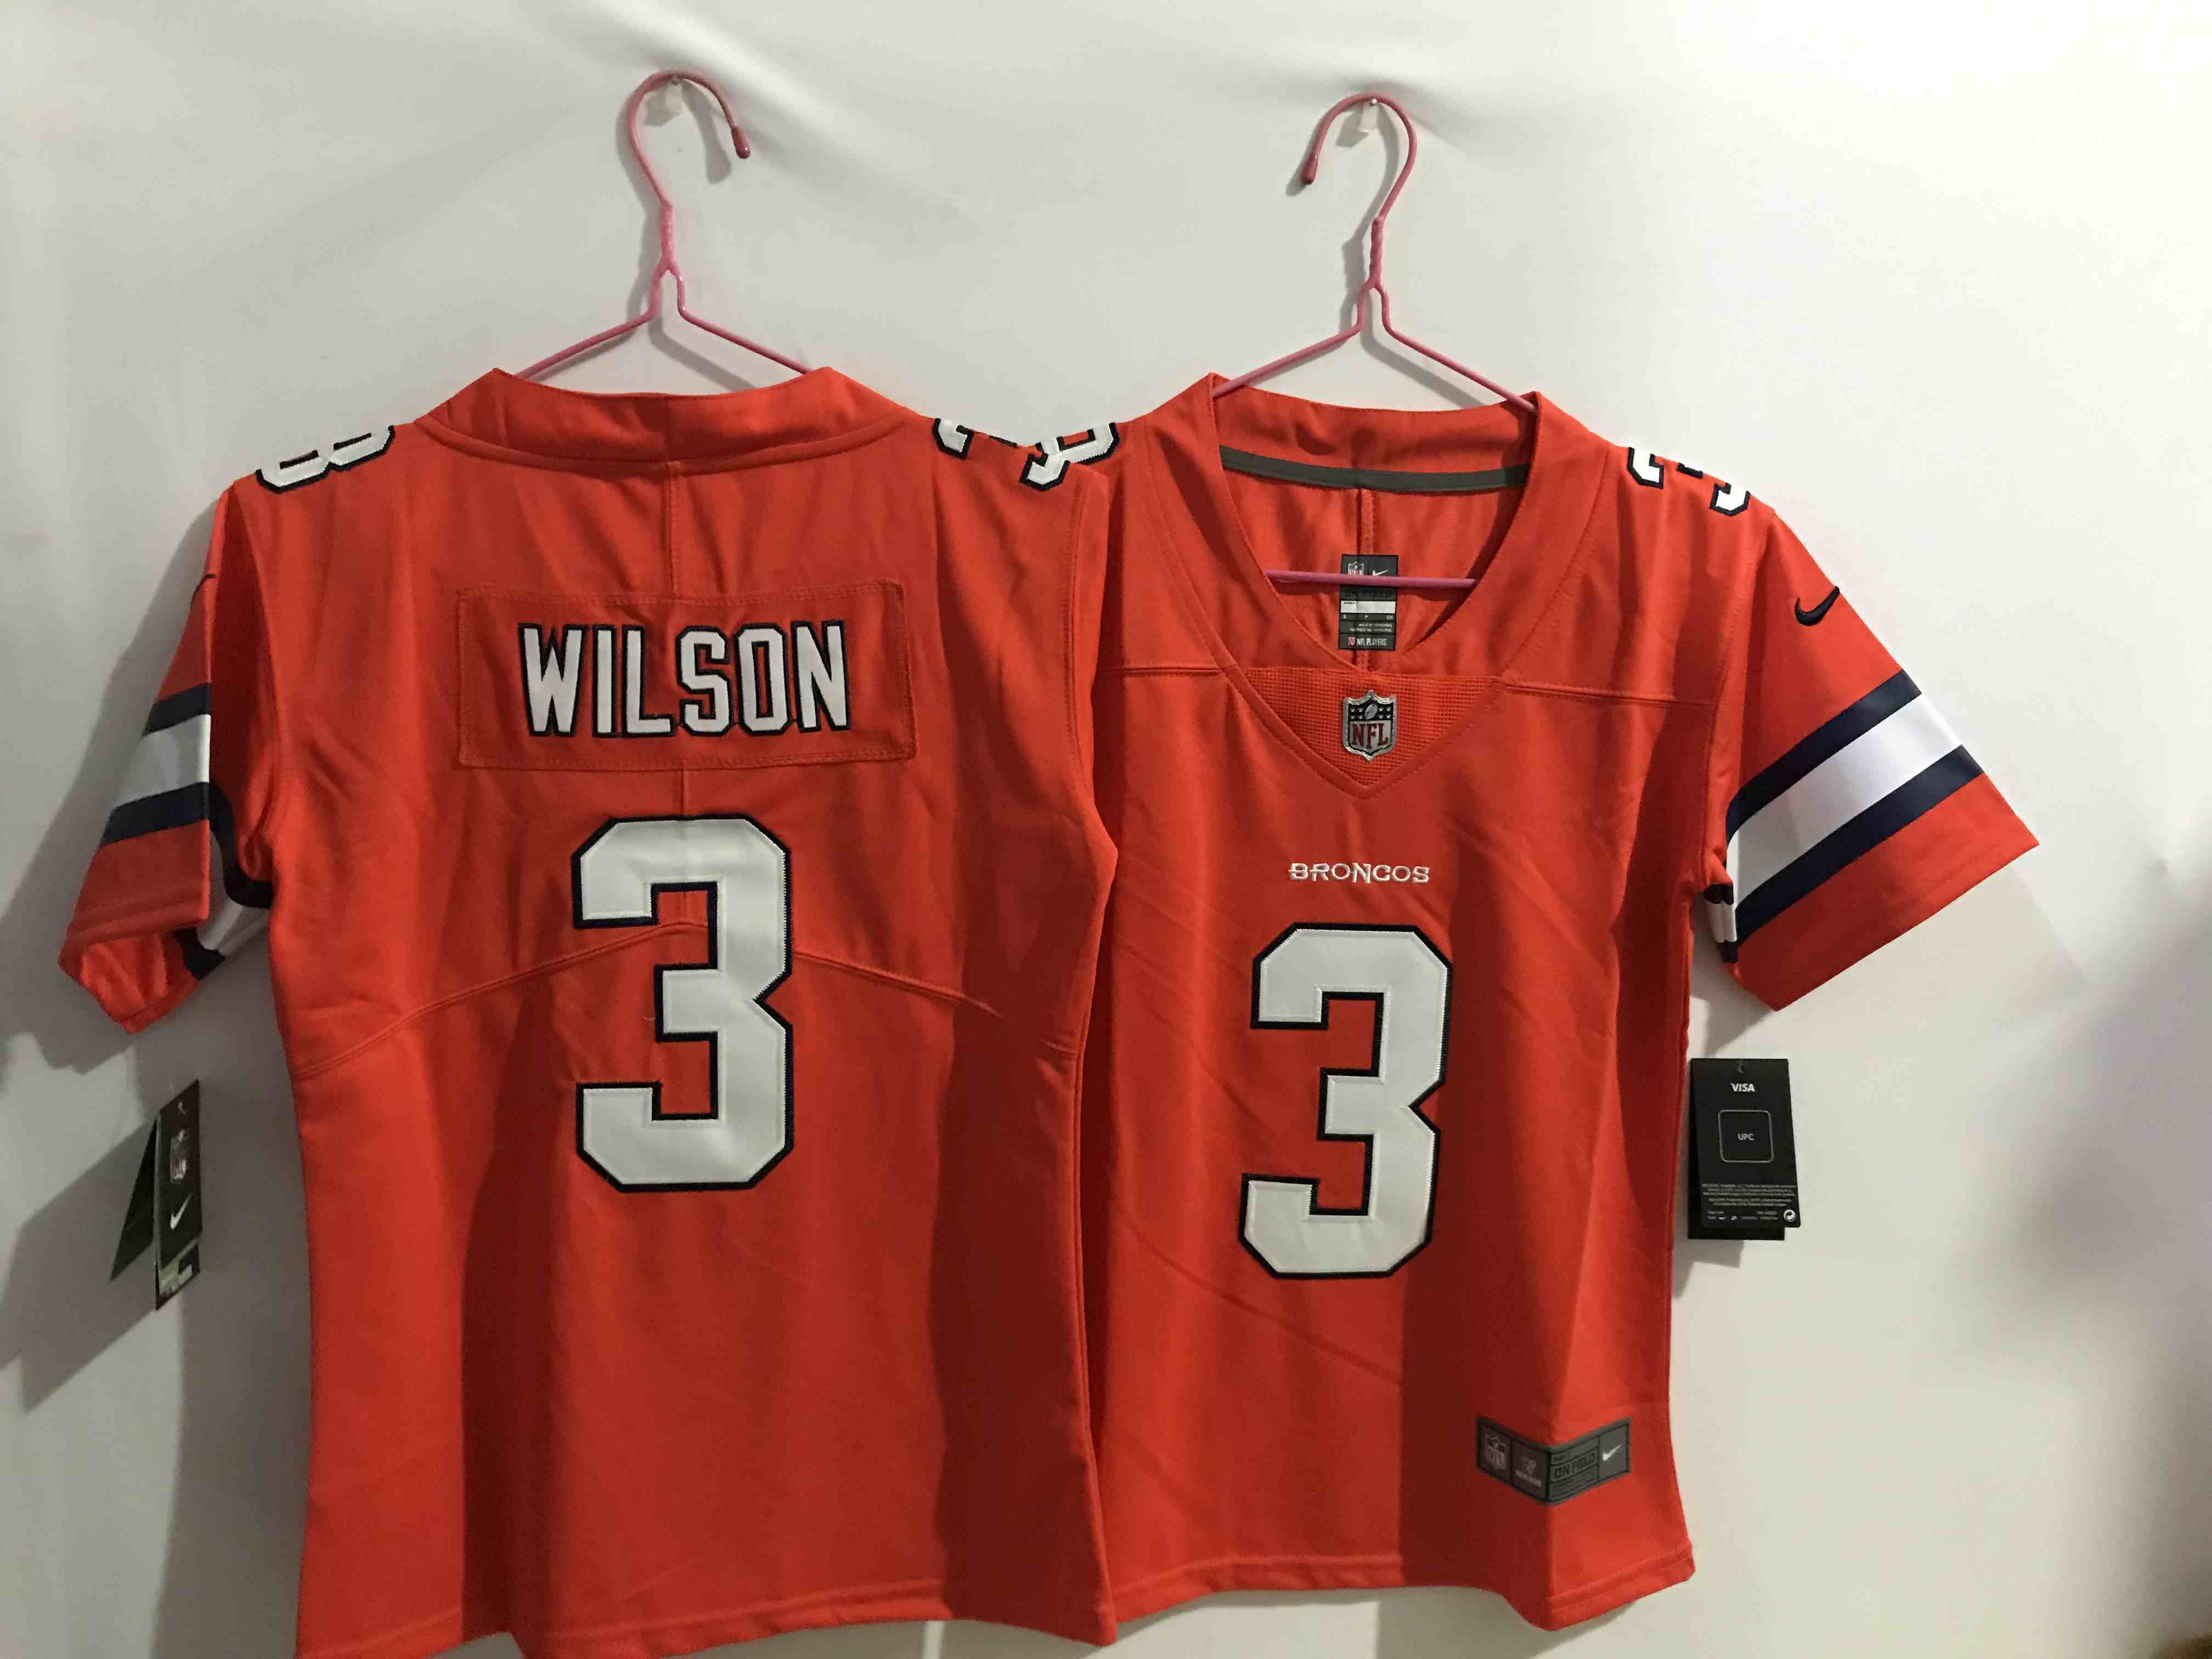 Women's Denver Broncos #3 Russell Wilson Orange Color Rush Limited Stitched Jersey